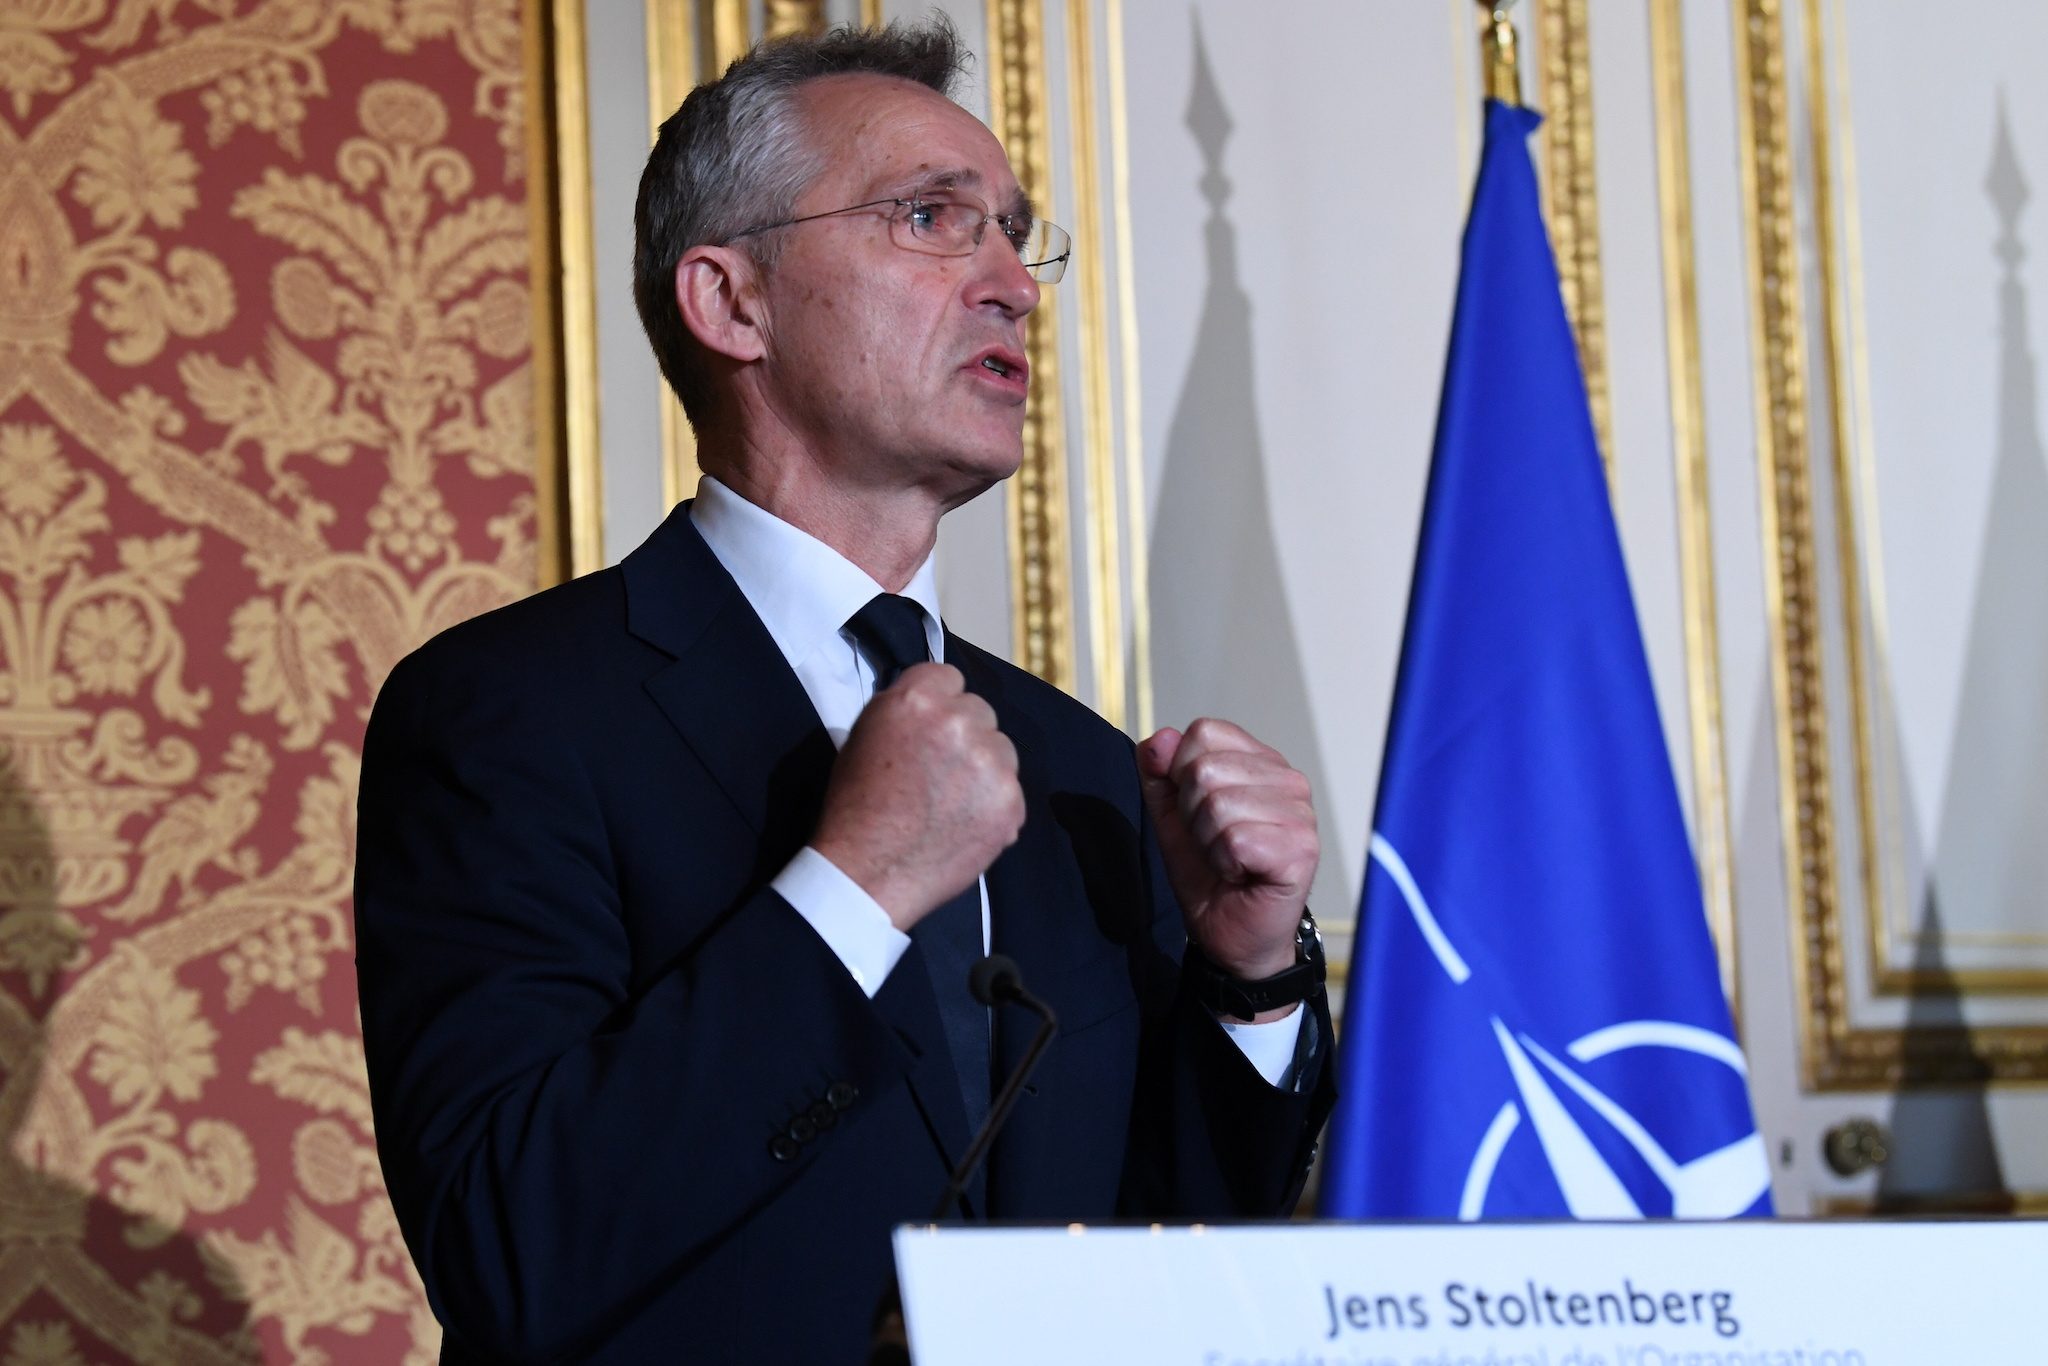 NATO seeks ‘meaningful’ dialogue with Russia early next year